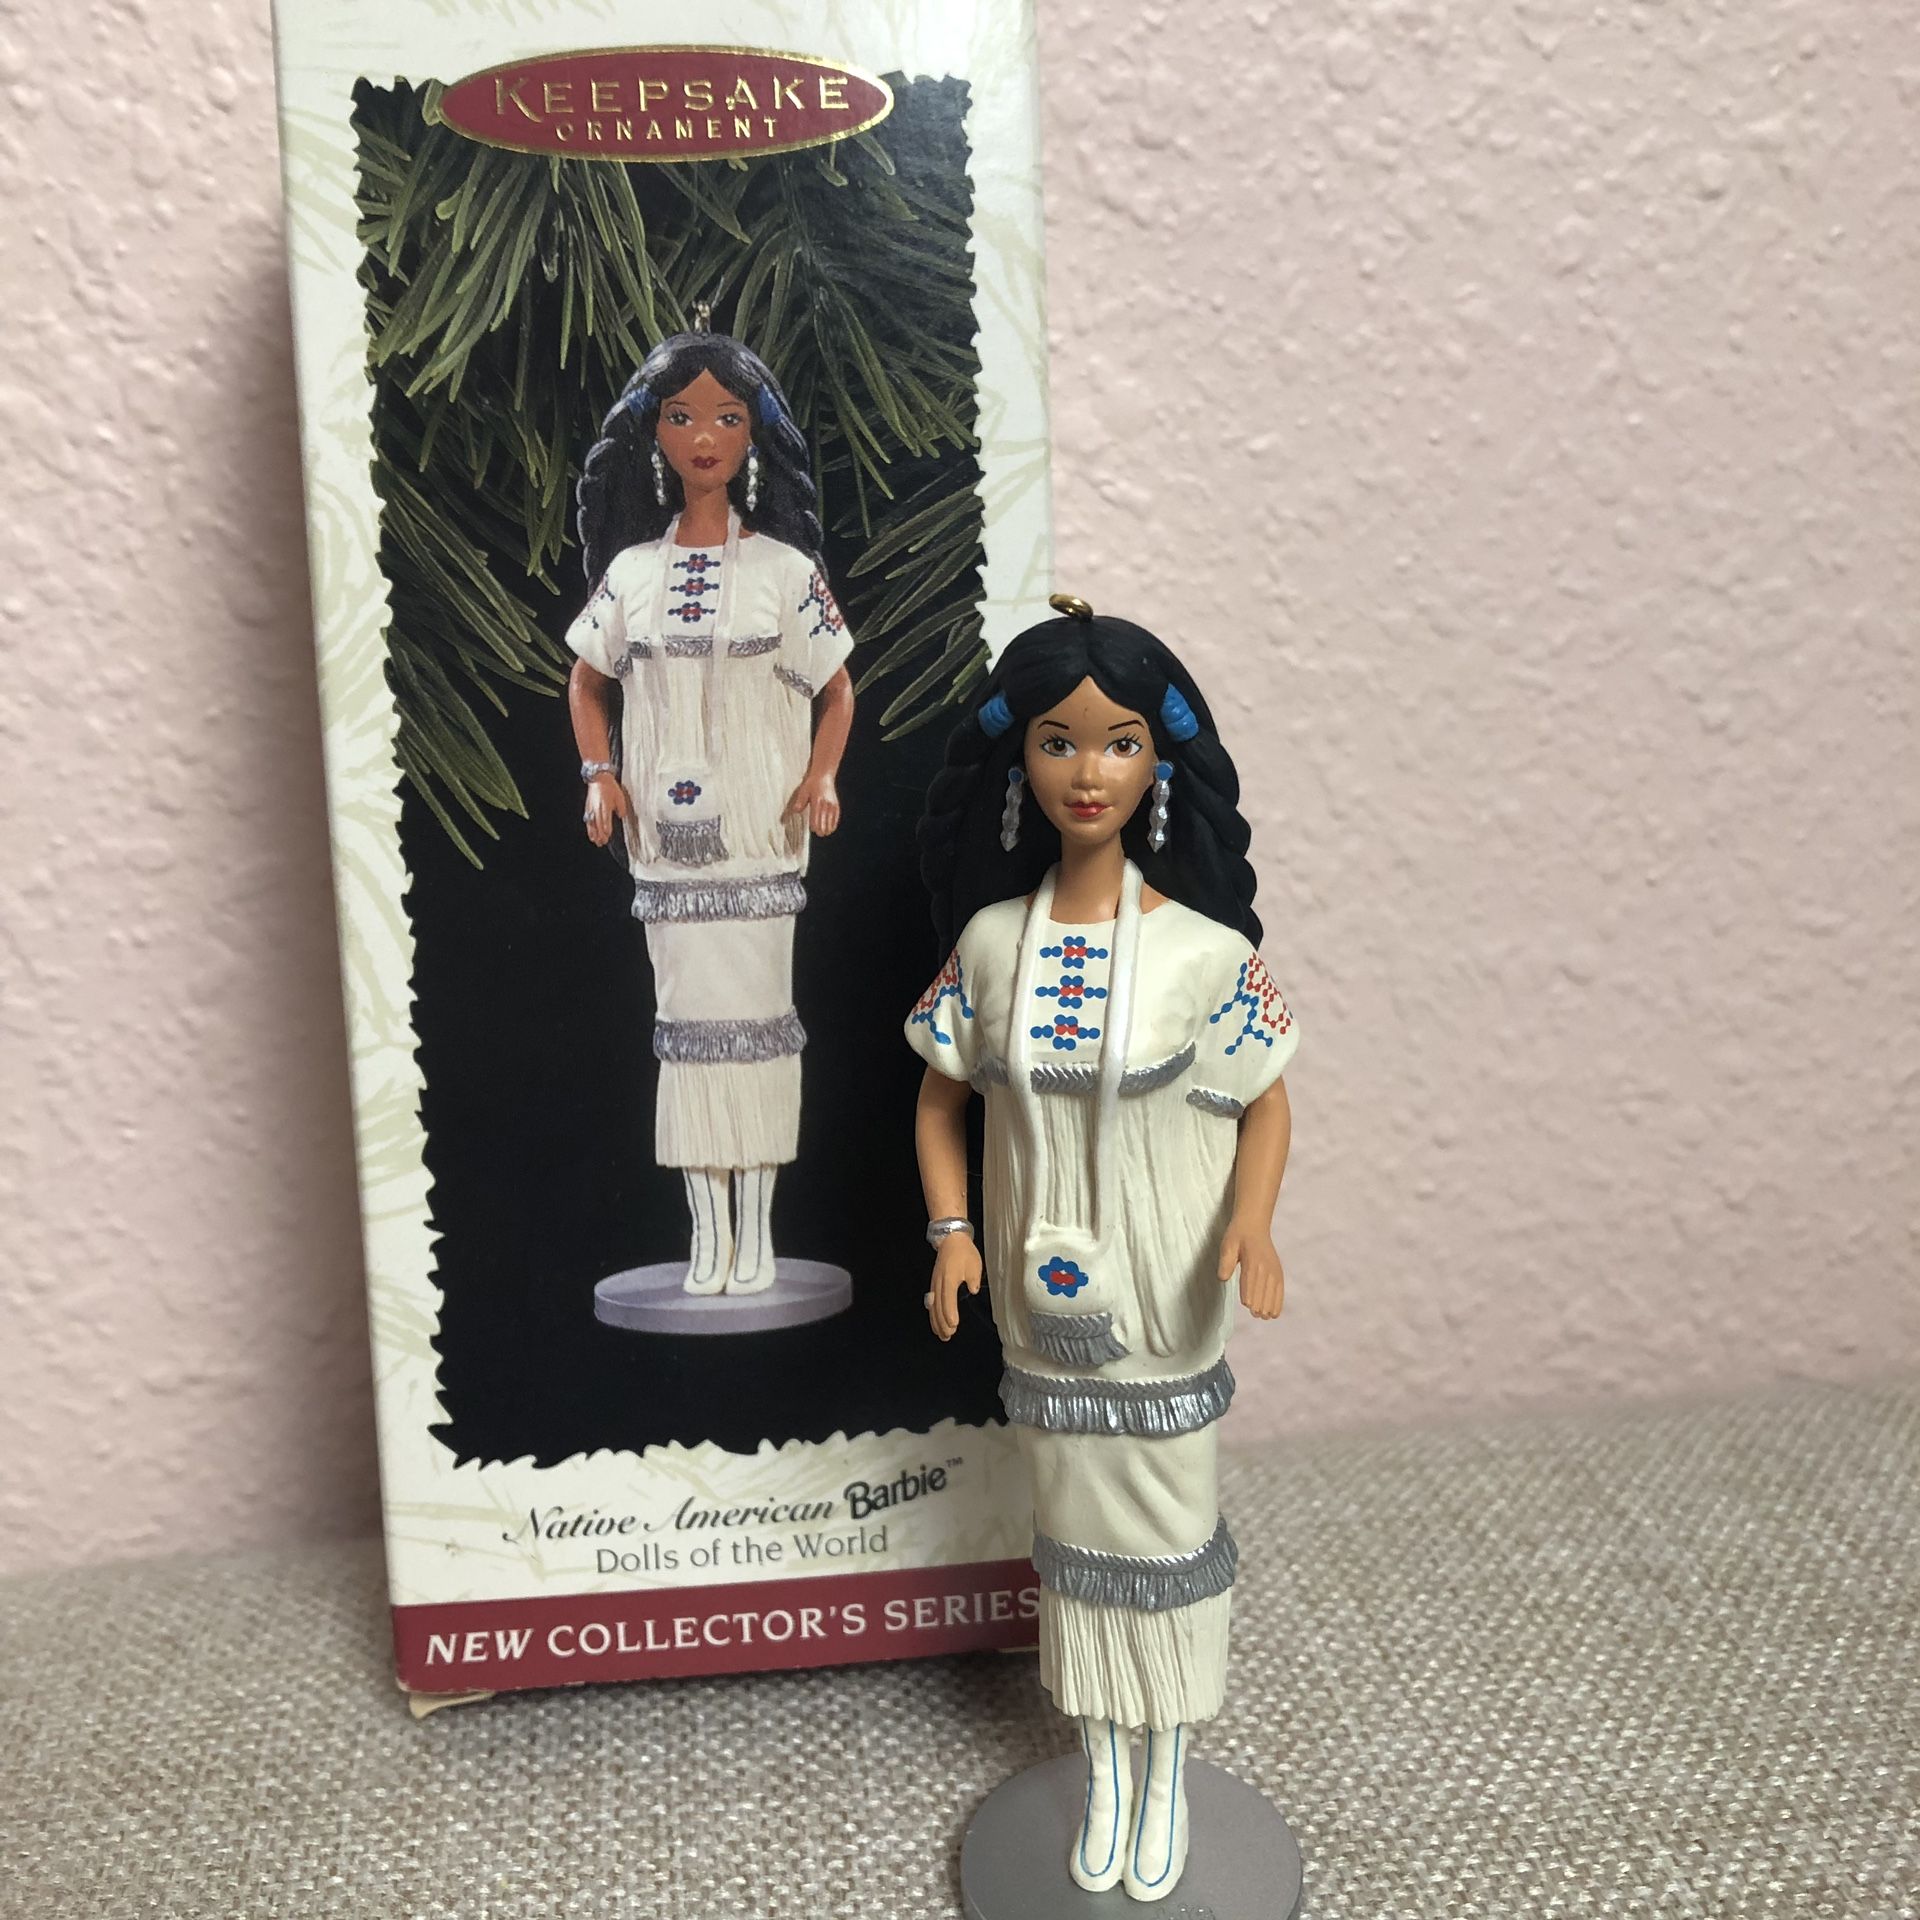 Native American Barbie Holiday Ornament